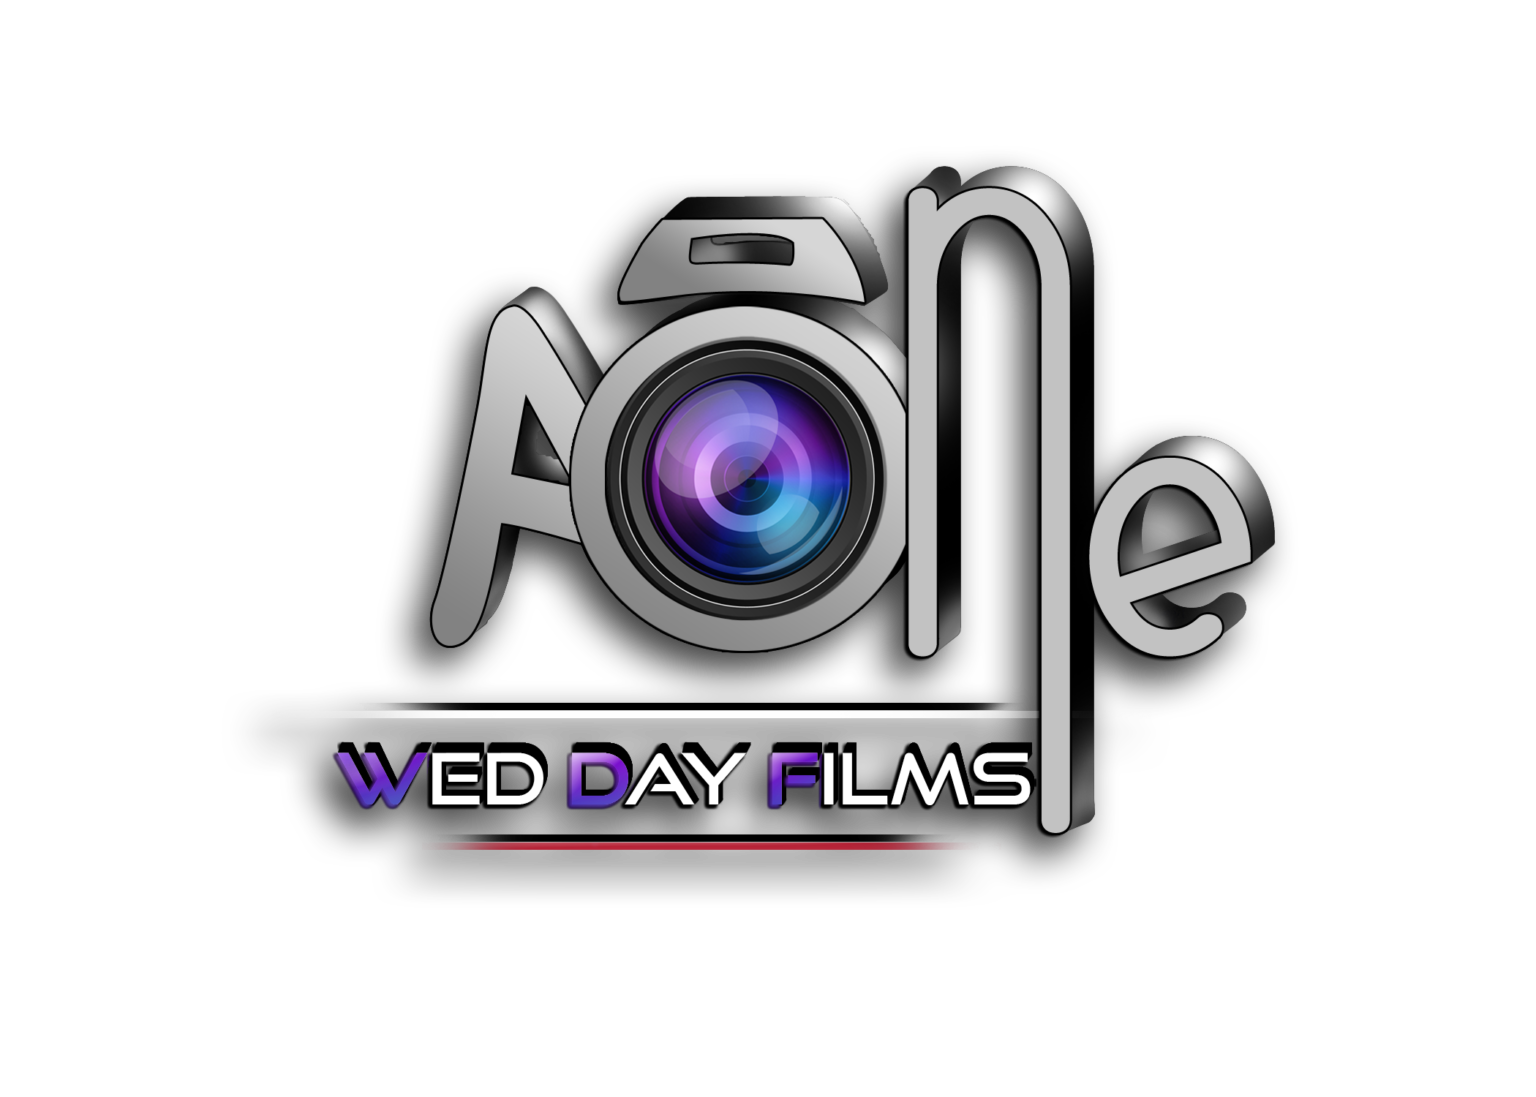 A-One Wed Day Films|Wedding Planner|Event Services